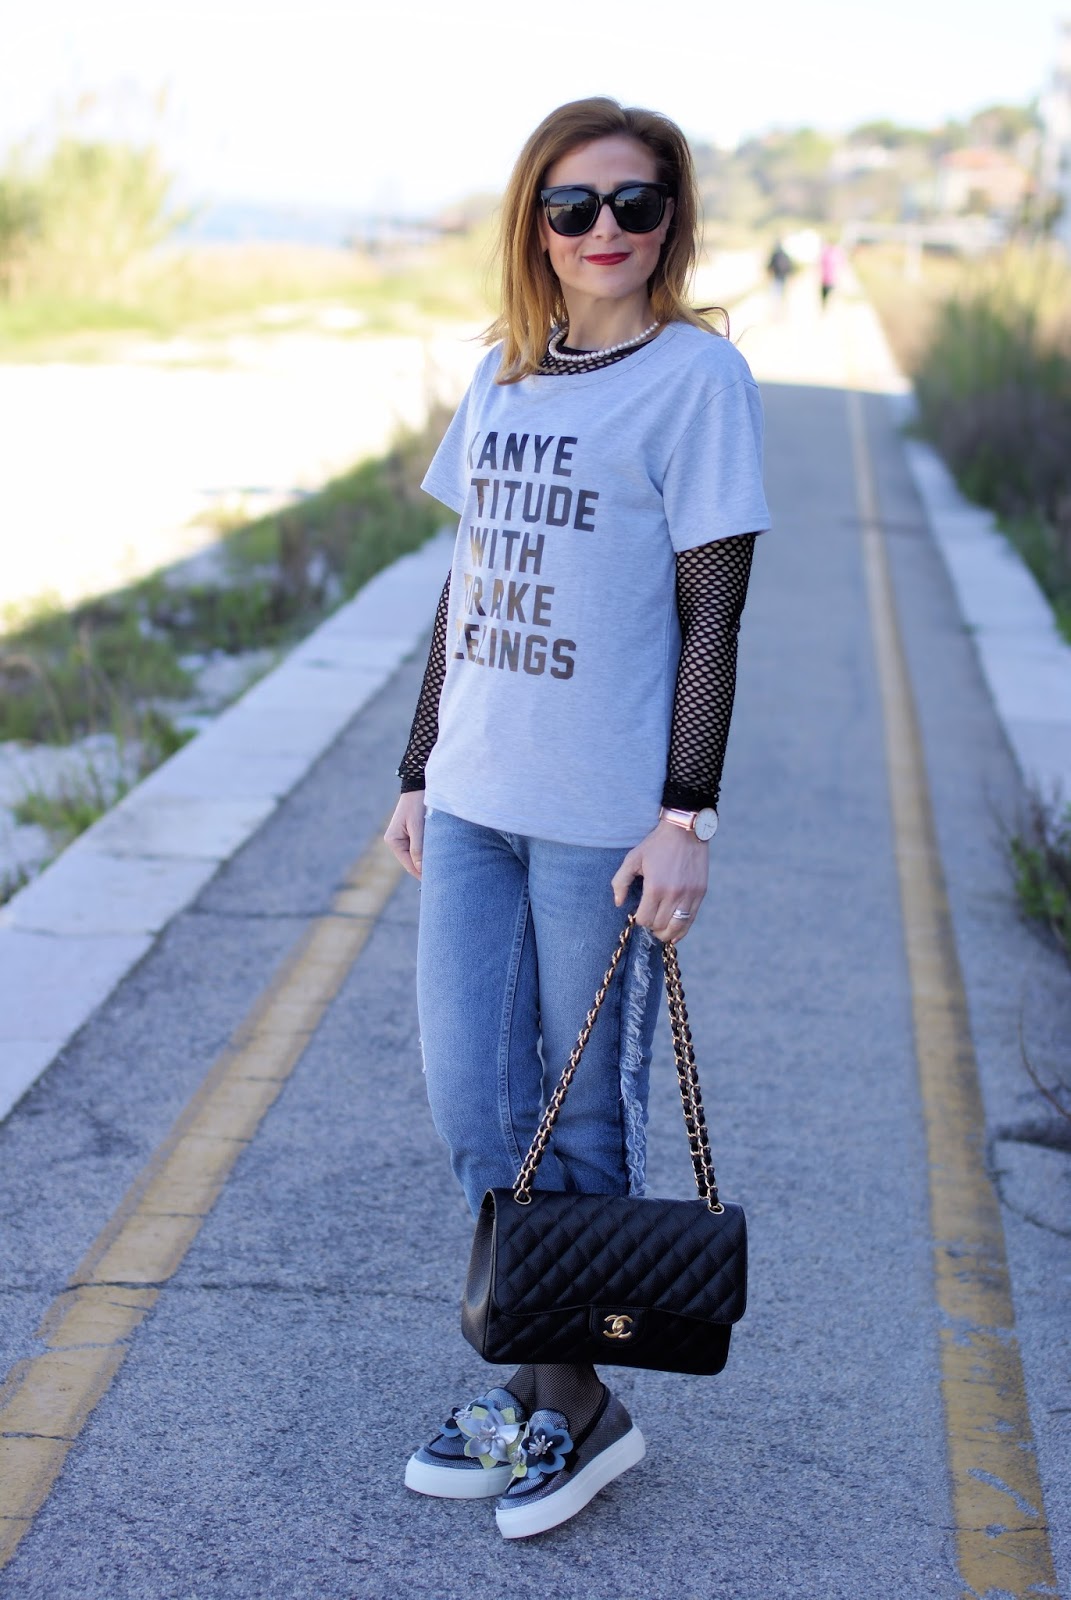 Kanye attitude with Drake feelings and 181 shoes on Fashion and Cookies fashion blog, fashion blogger style